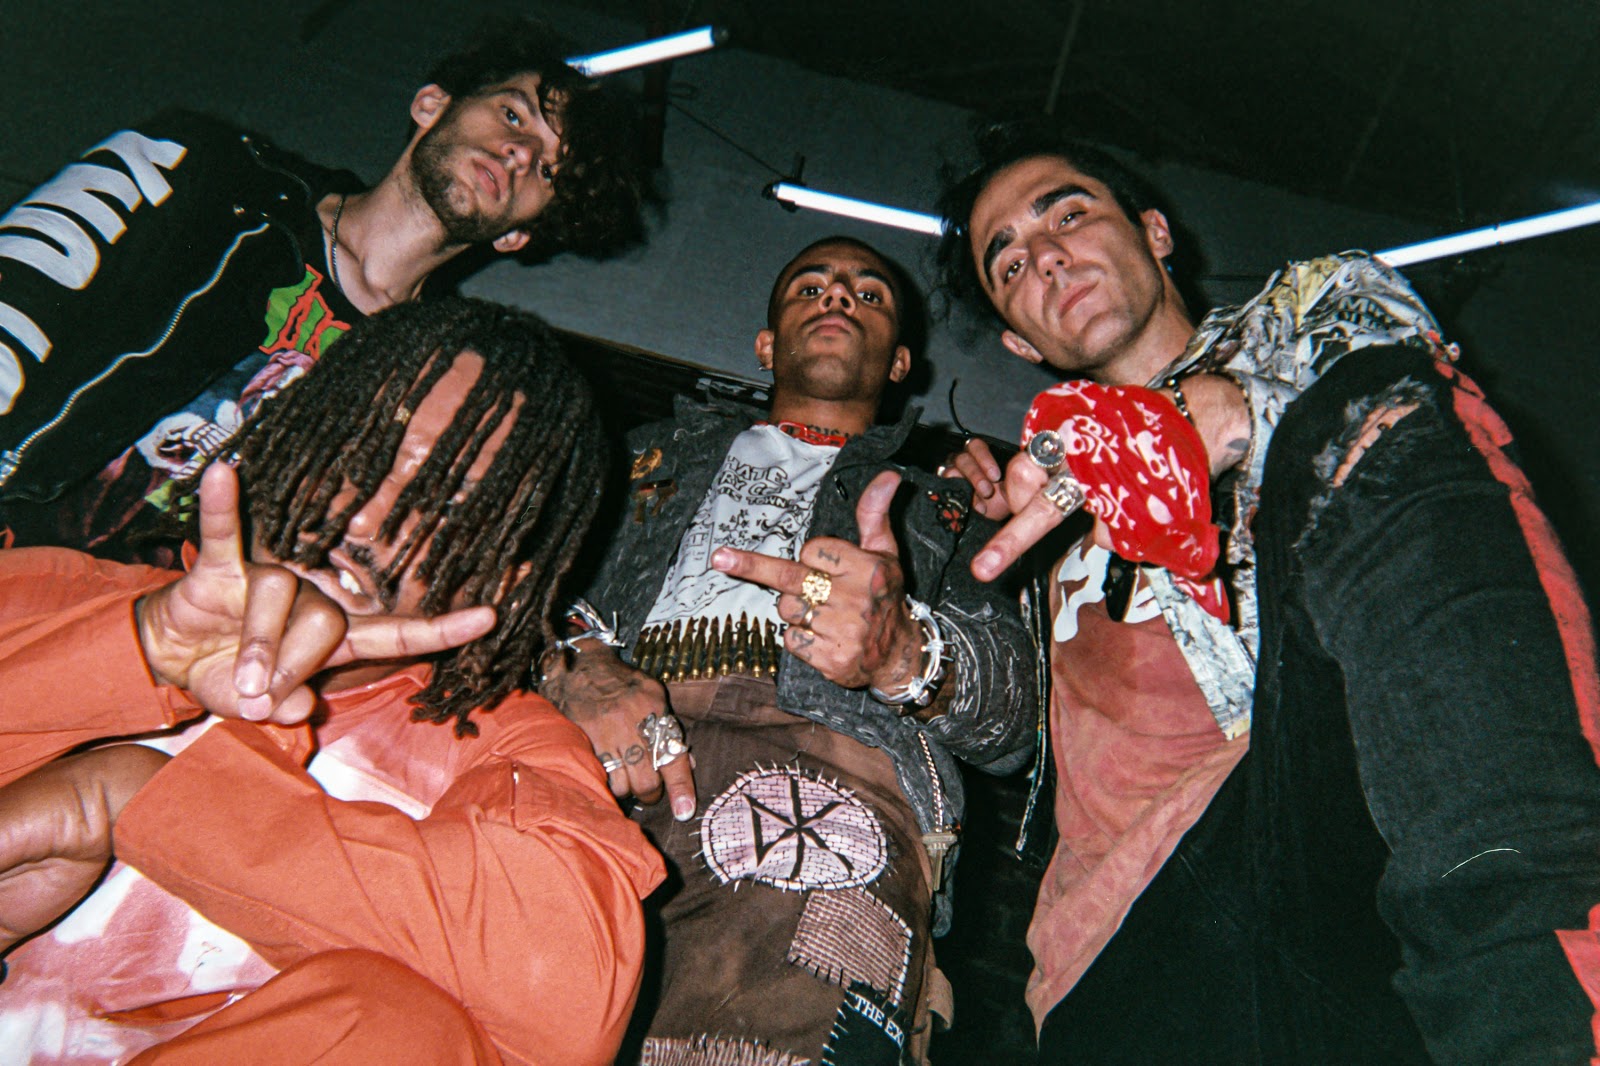 Vic Mensa has just released the debut project by his band 93PUNX